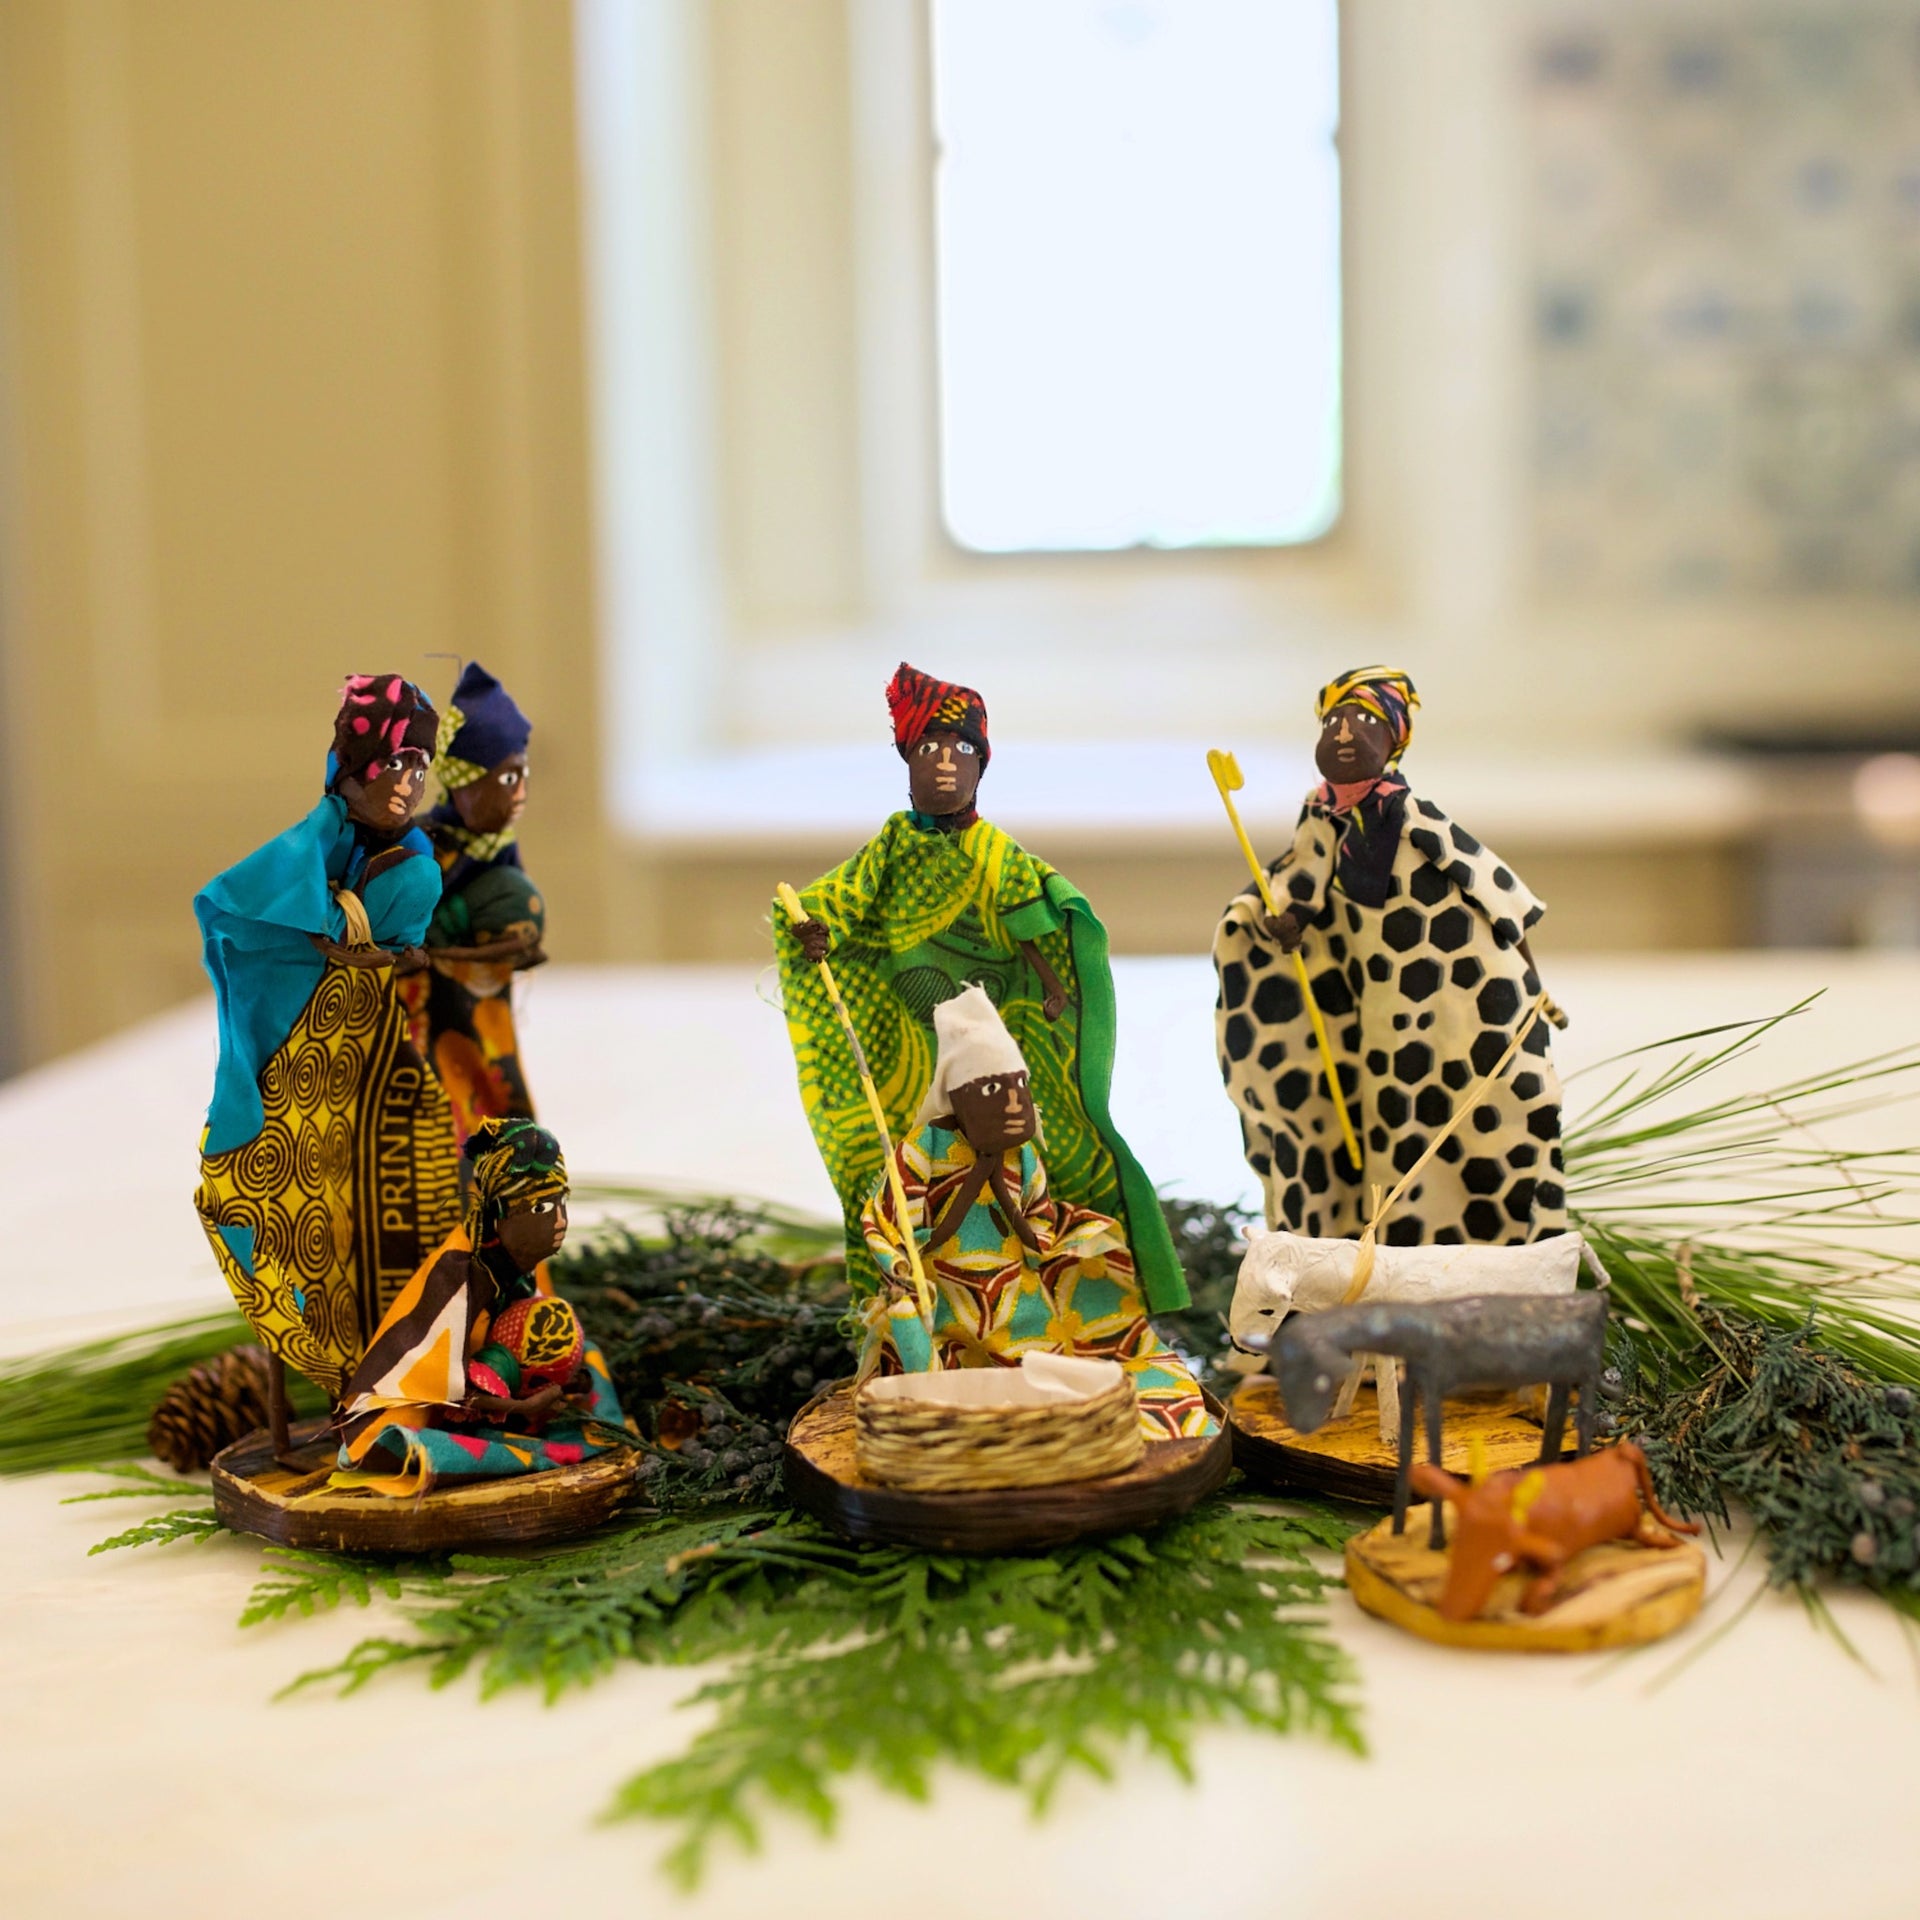 Handmade African Nativity Set in colorful fabric